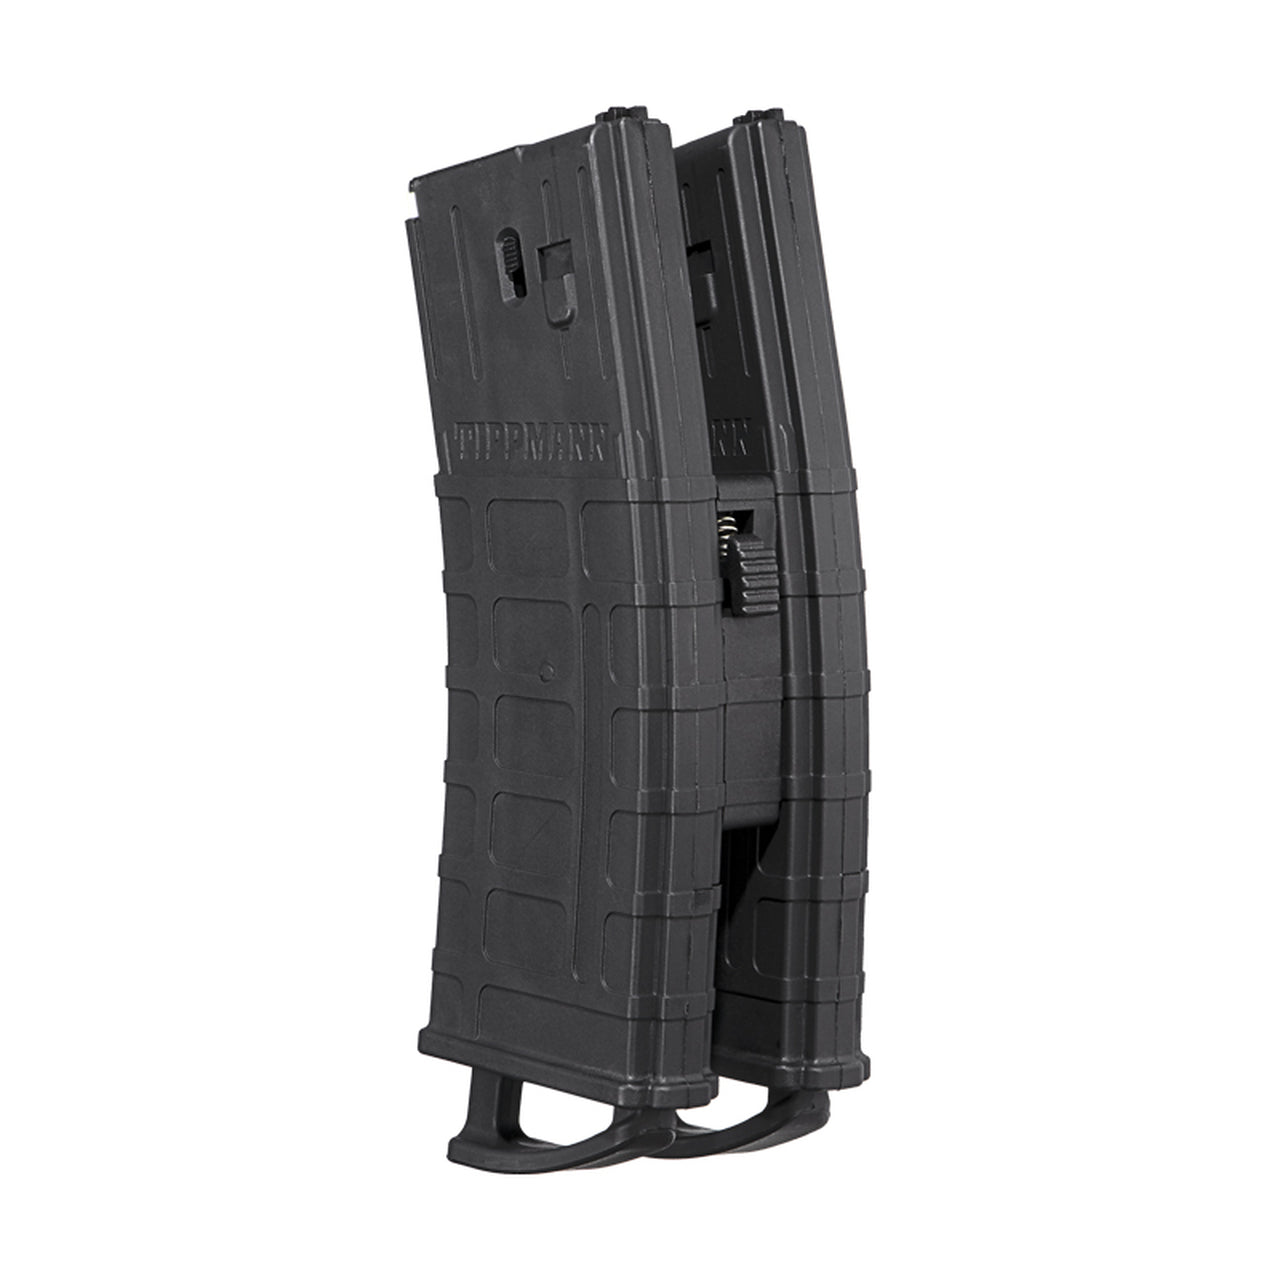 Tippmann TMC & Z18 .50Cal 2 Pack Dual Magazines with speed loader adapter